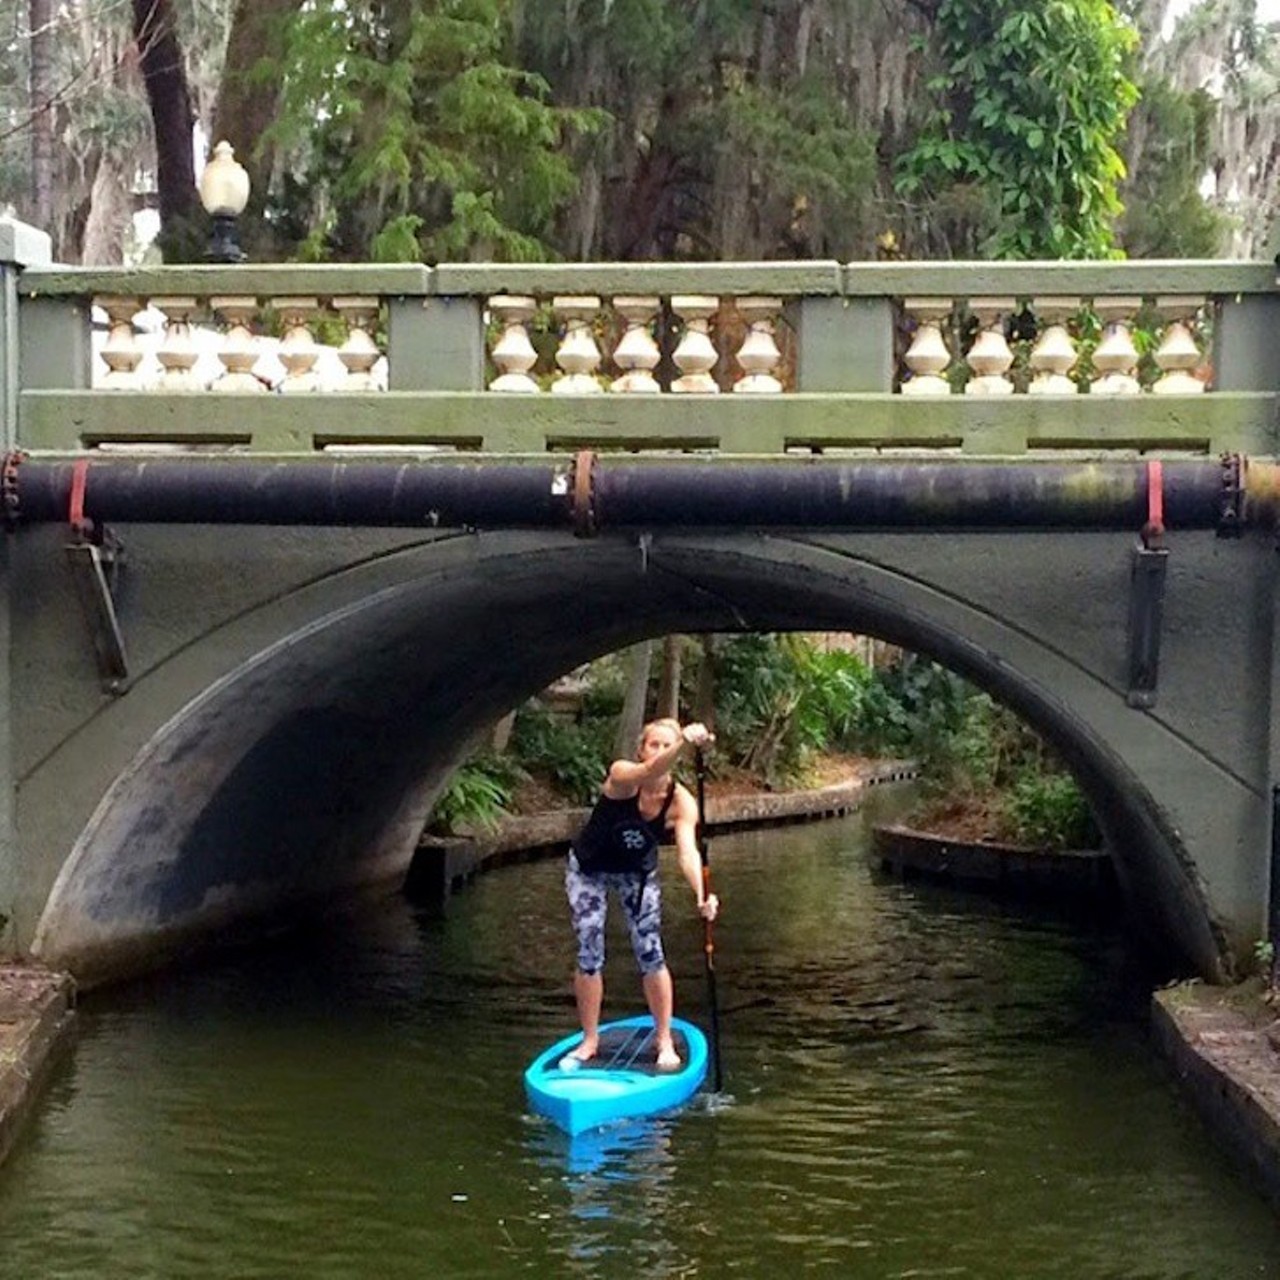 Dinky Dock
Dinky Dock Park, 410 Ollie Ave., Winter Park
Distance from Orlando: 24 minutes
Stand-up paddleboard tours are available through Paddleboard Orlando for varying prices, depending on which day you decide to go. After renting equipment on site, you can easily paddle down the still waters with a group. 
Photo via supnewjersey/Instagram